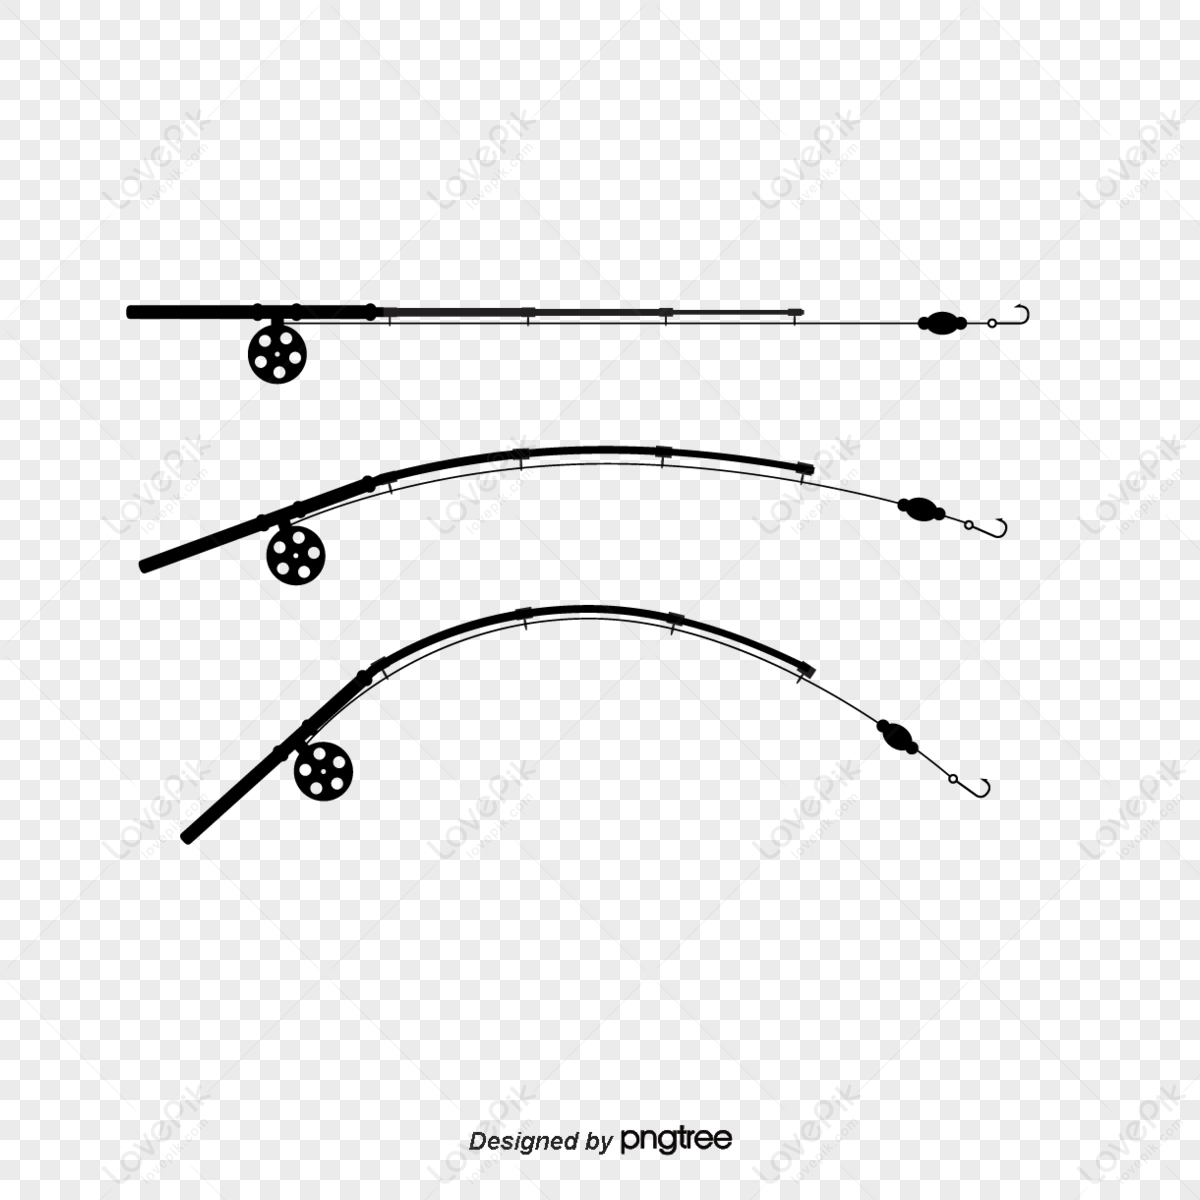 Fishing Rod Vector PNG Images With Transparent Background